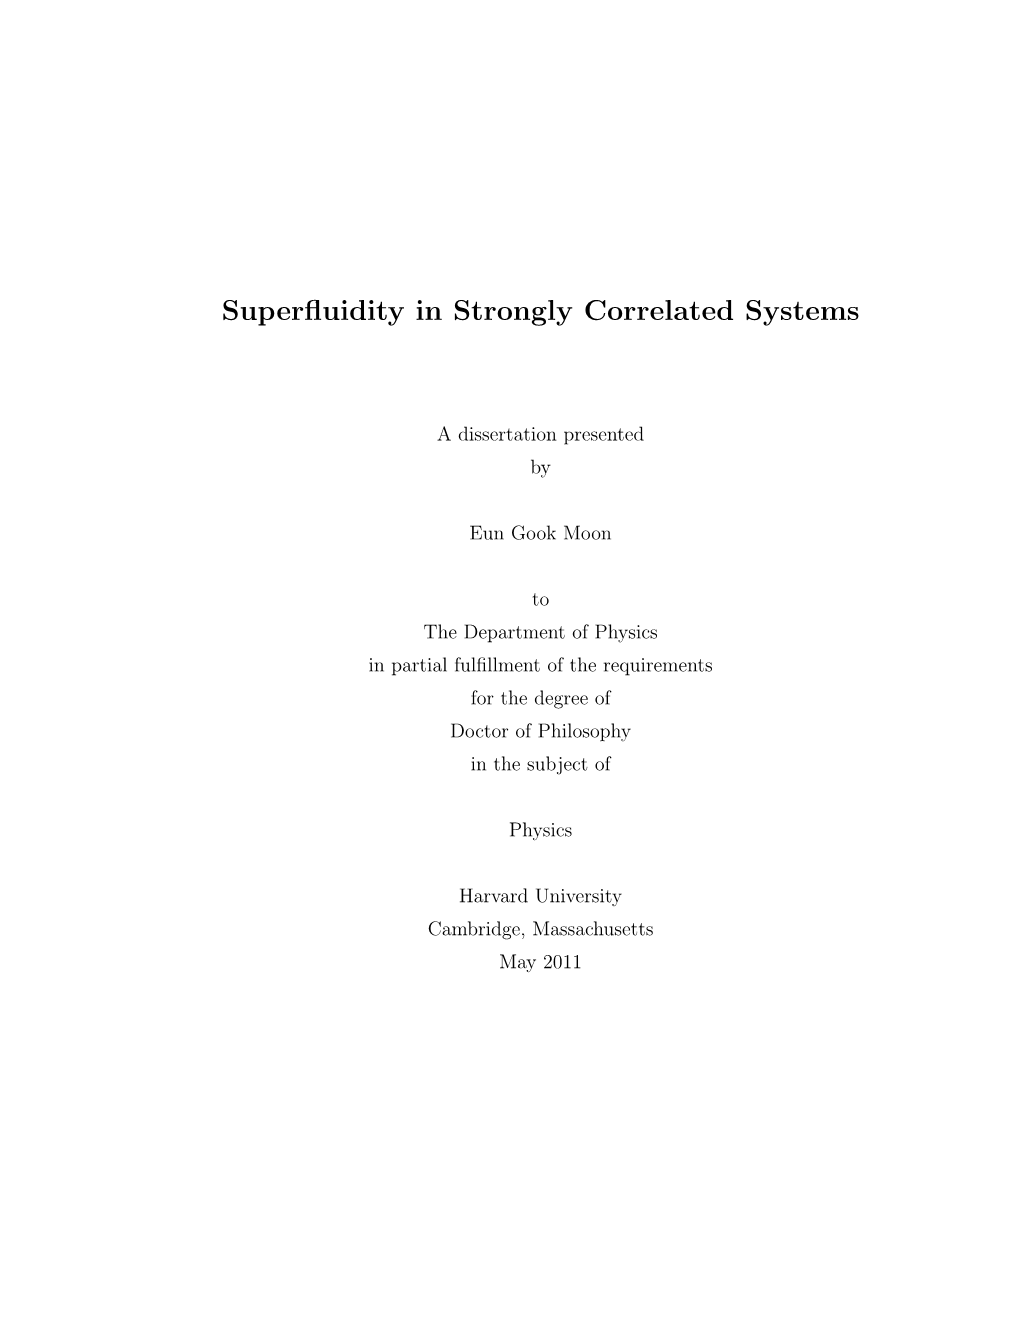 Superfluidity in Strongly Correlated Systems